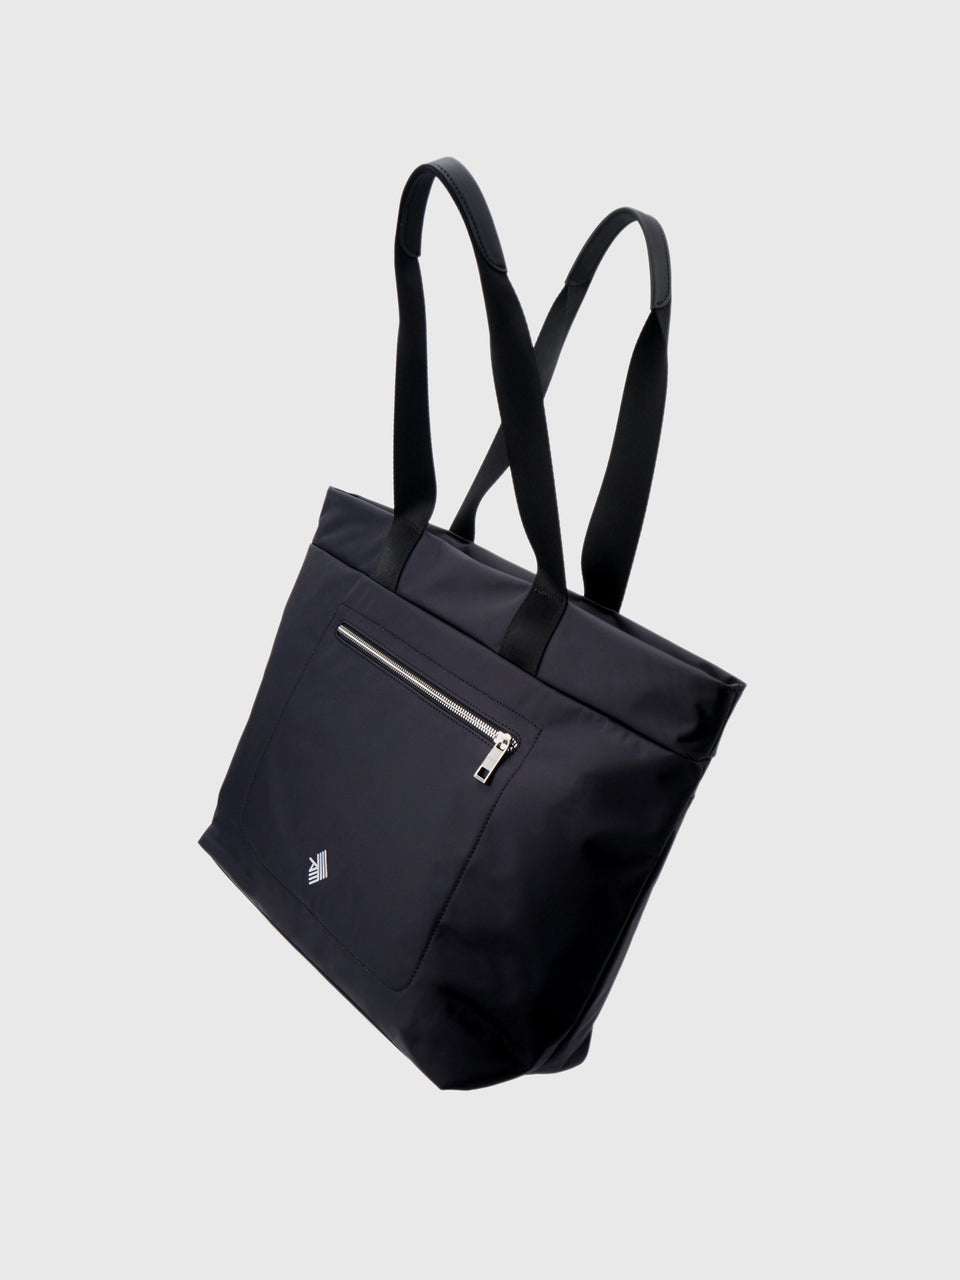 Carry-All Tote Bag - Charcoal Black